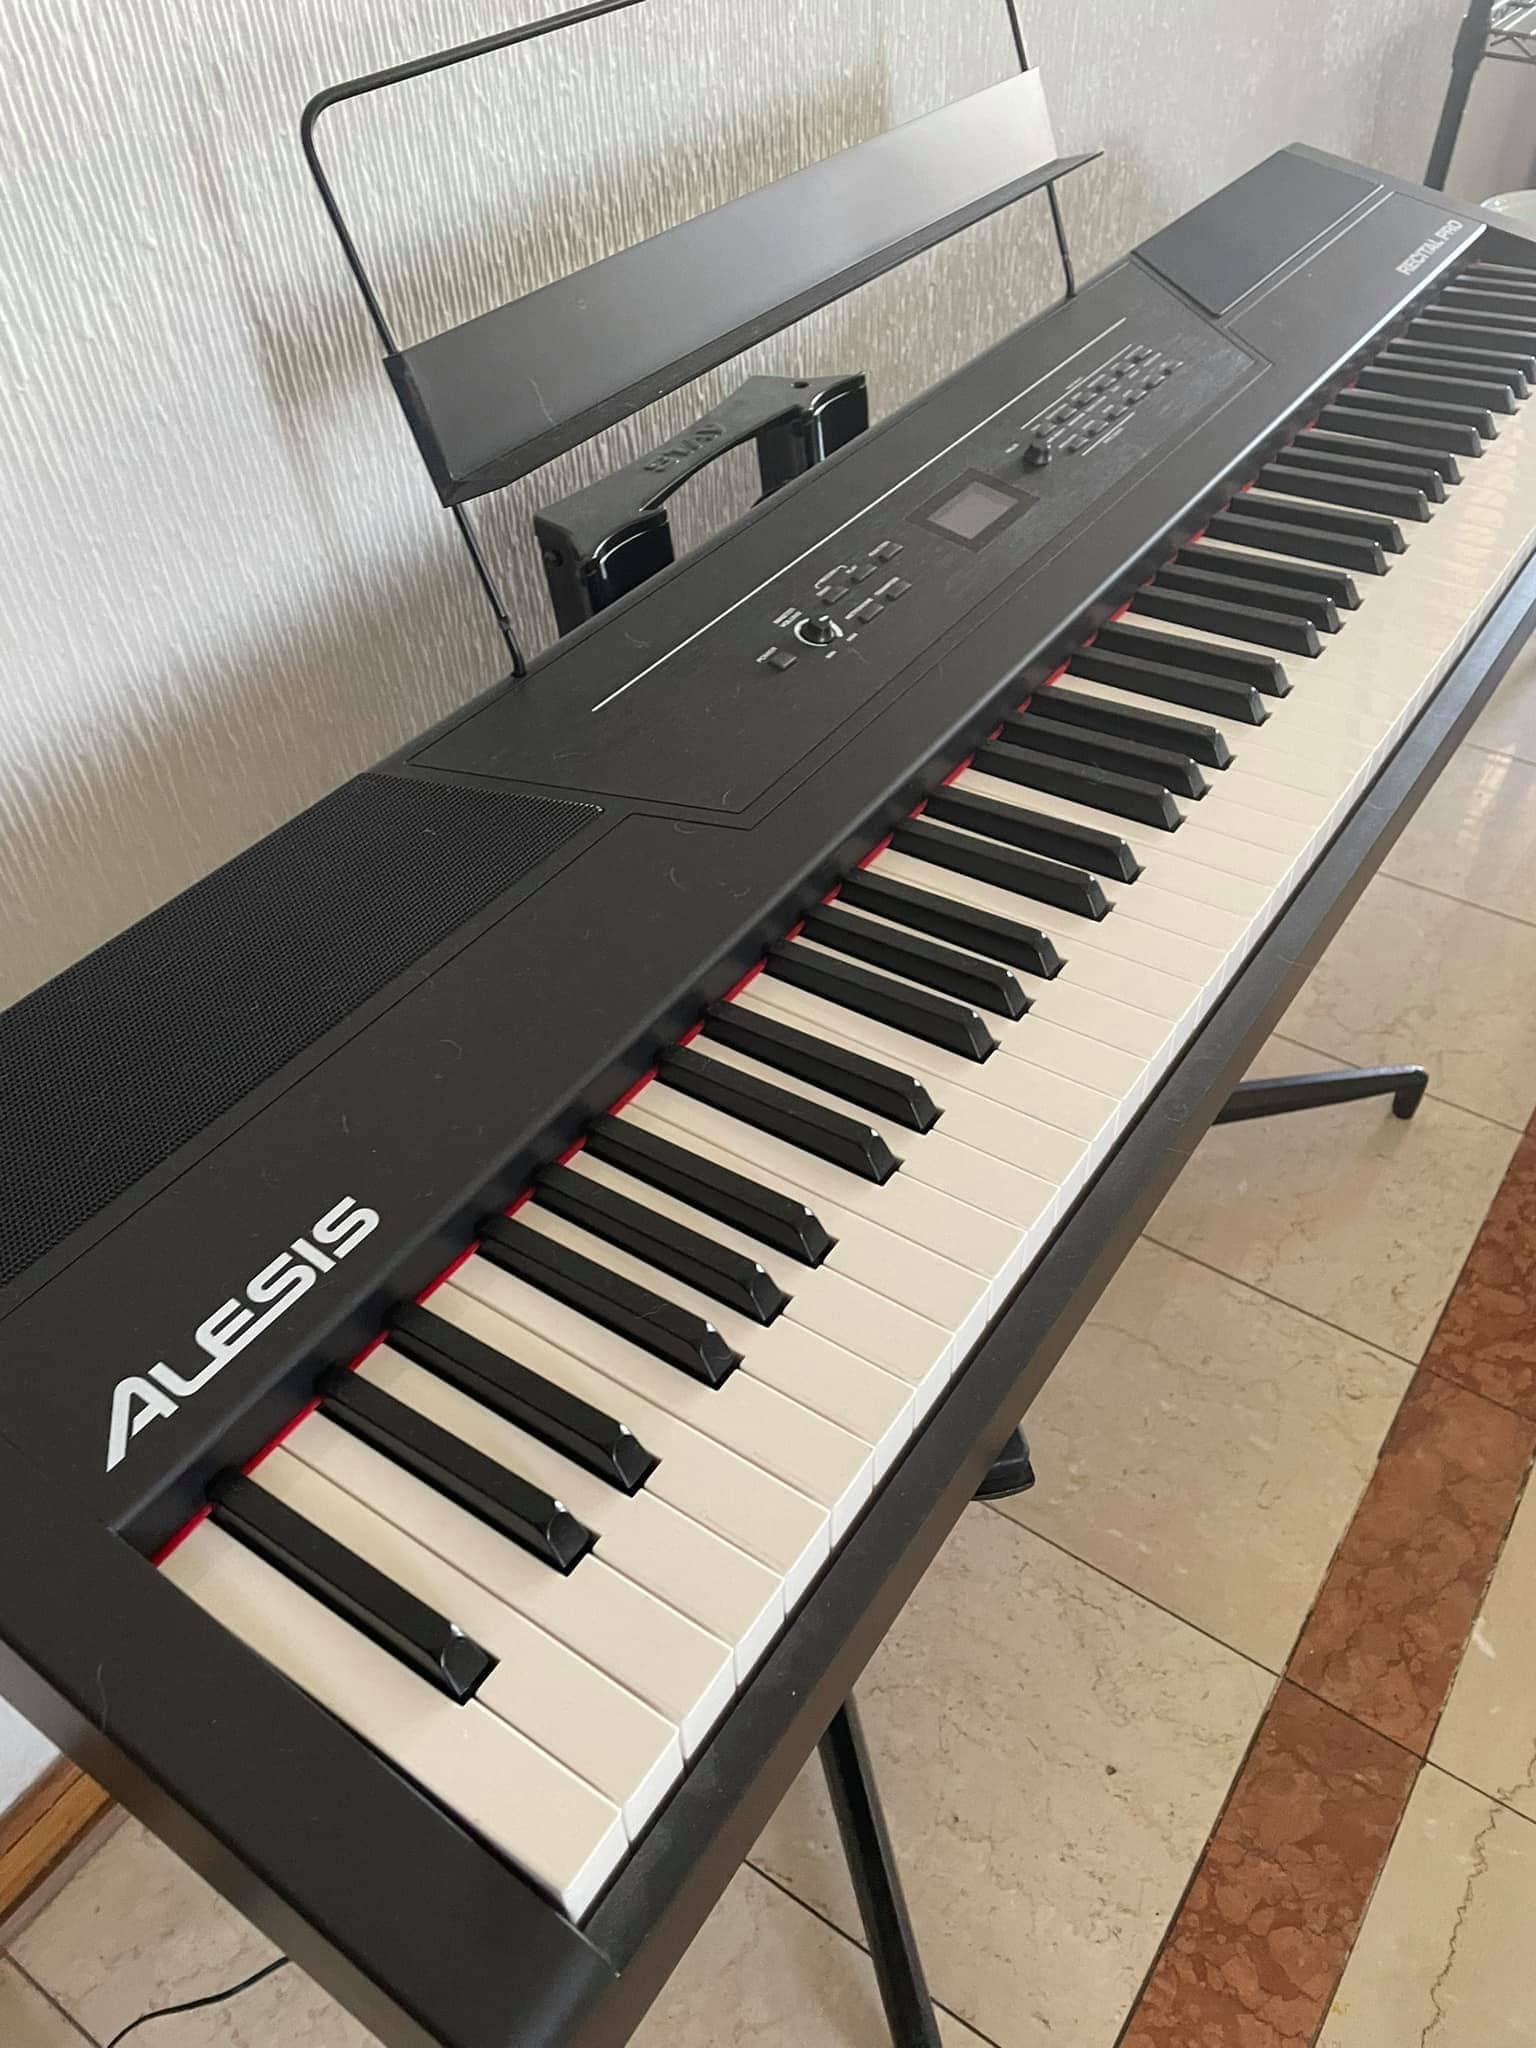 The Alesis Recital Pro offers all the basic outputs 